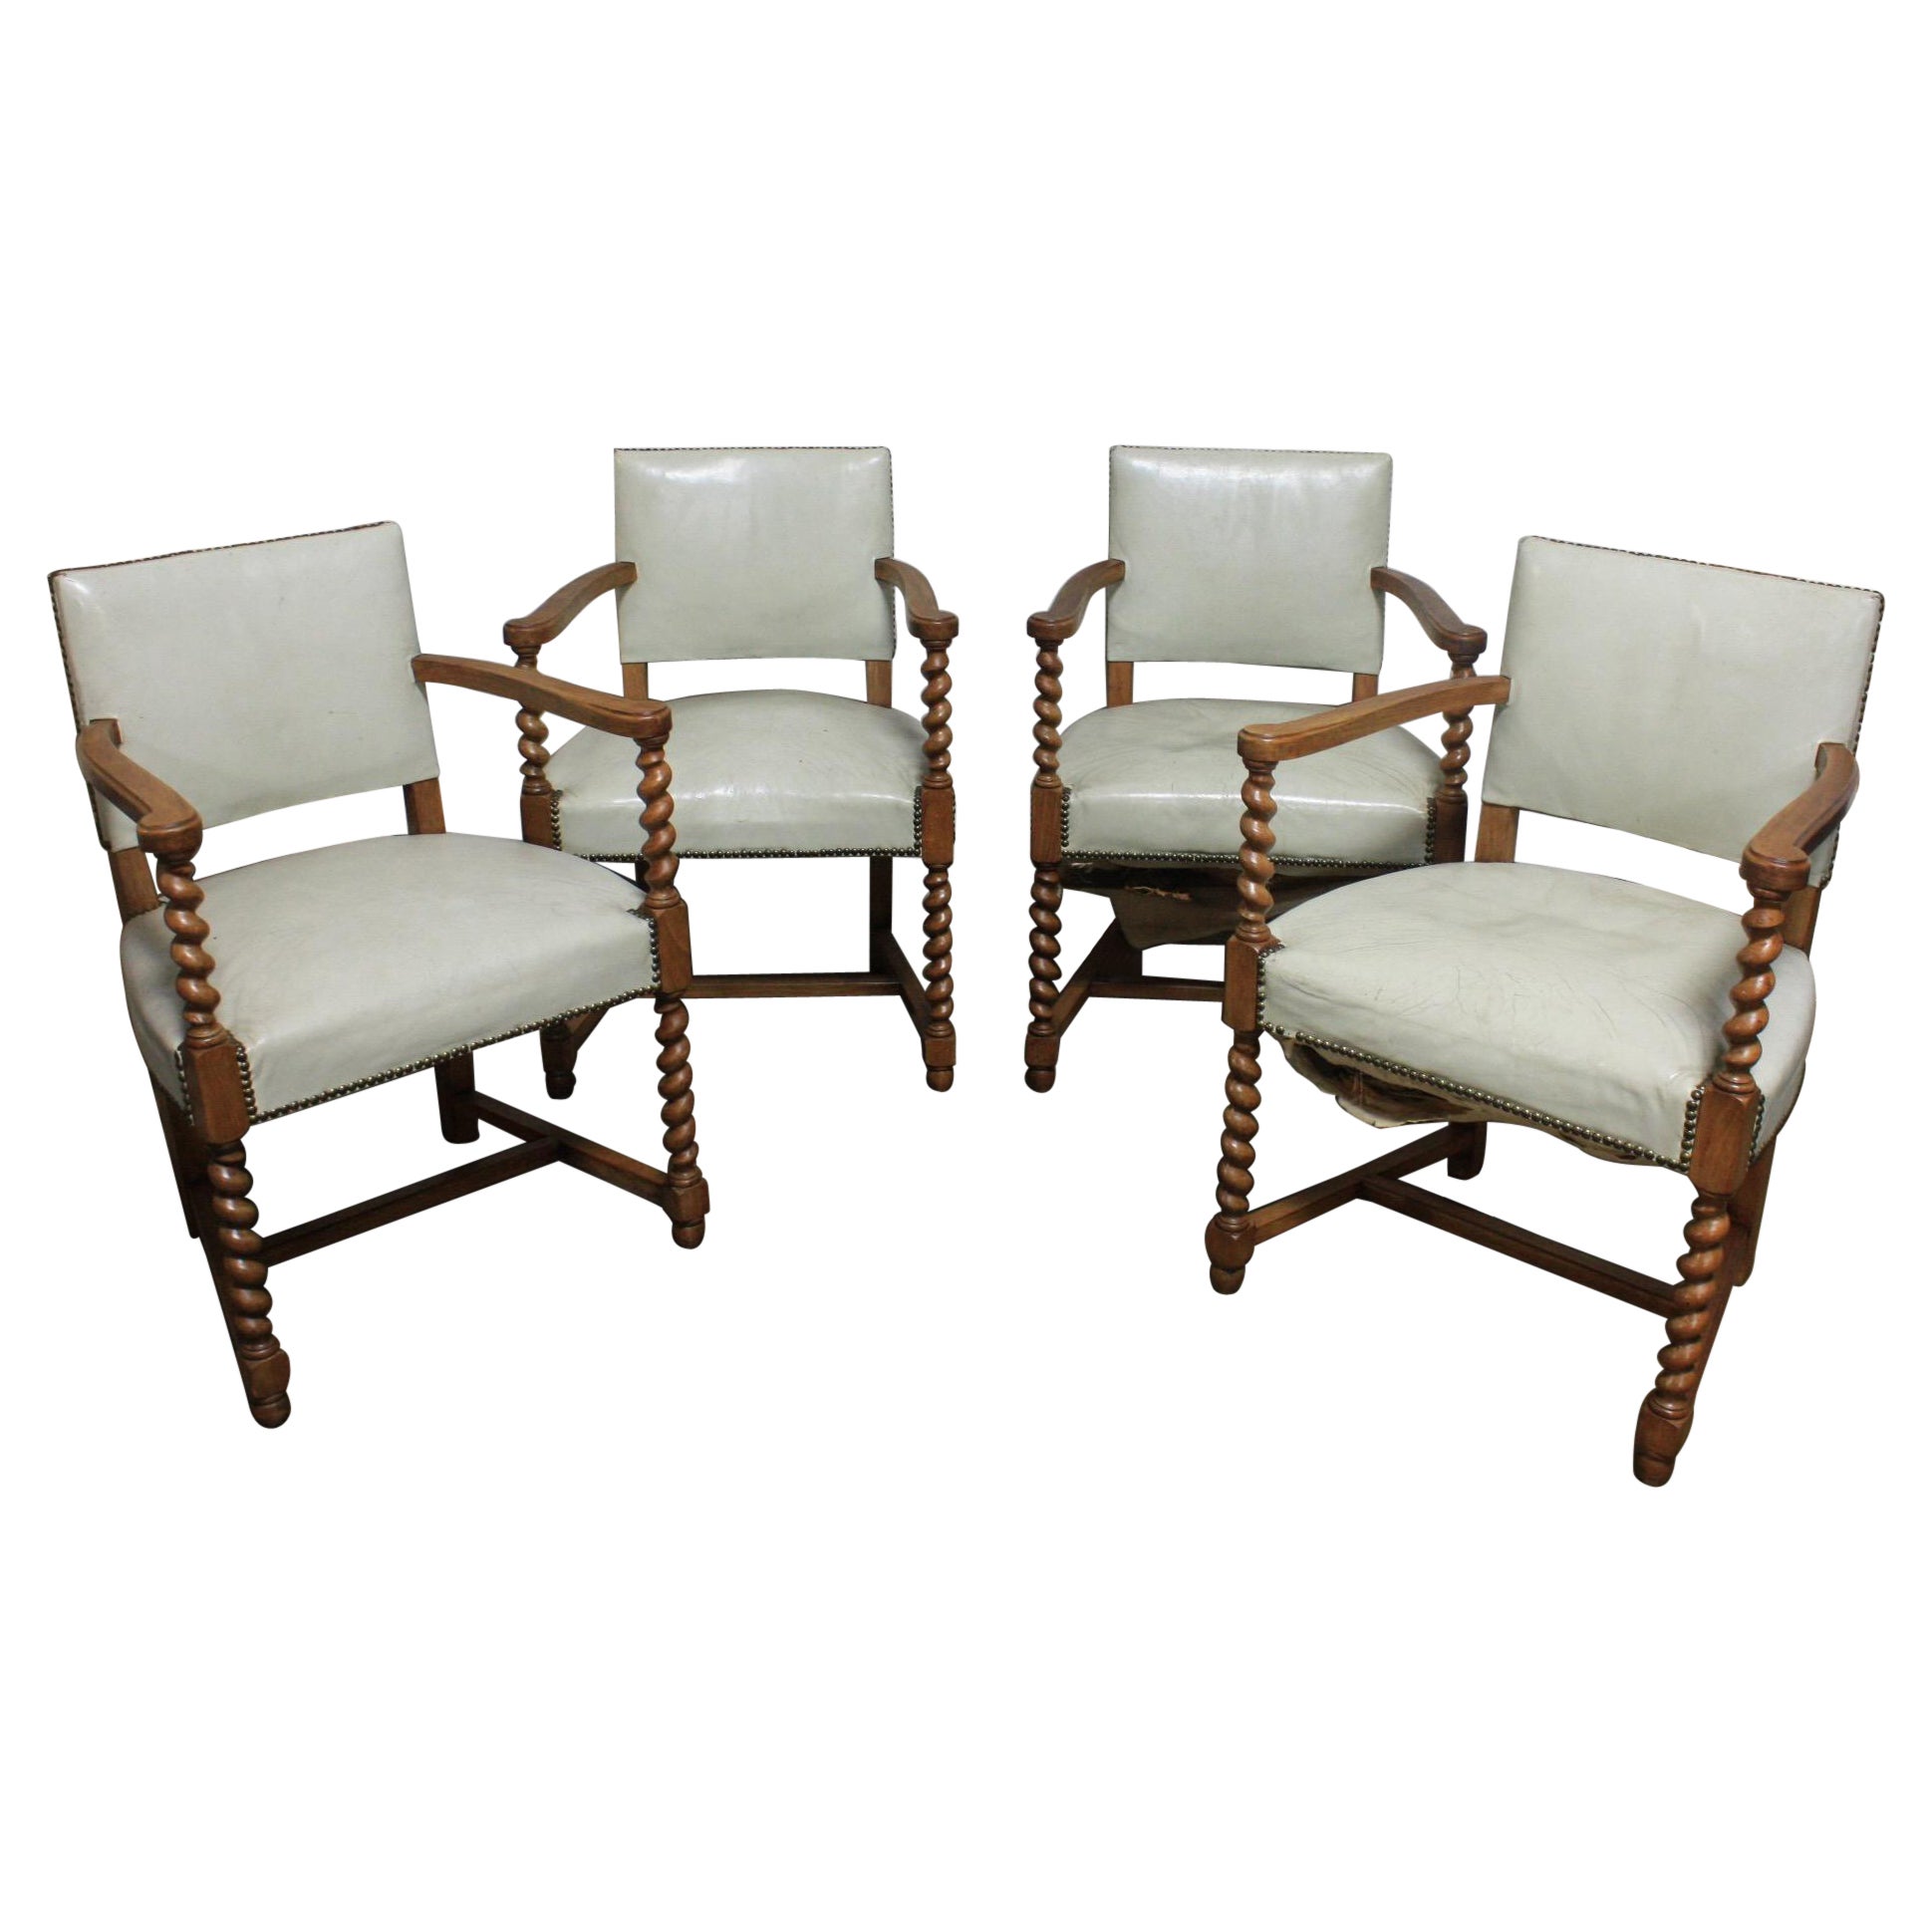 French Mid-20th Century Pairs of Armchairs